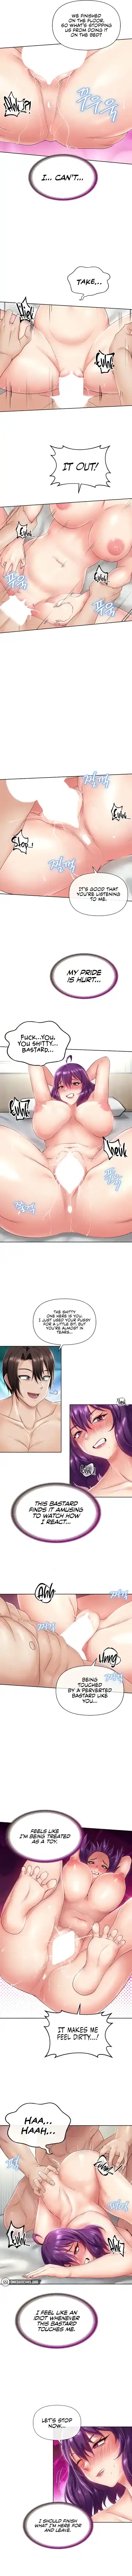 Welcome to the Isekai Convenience Store Fhentai.net - Page 86